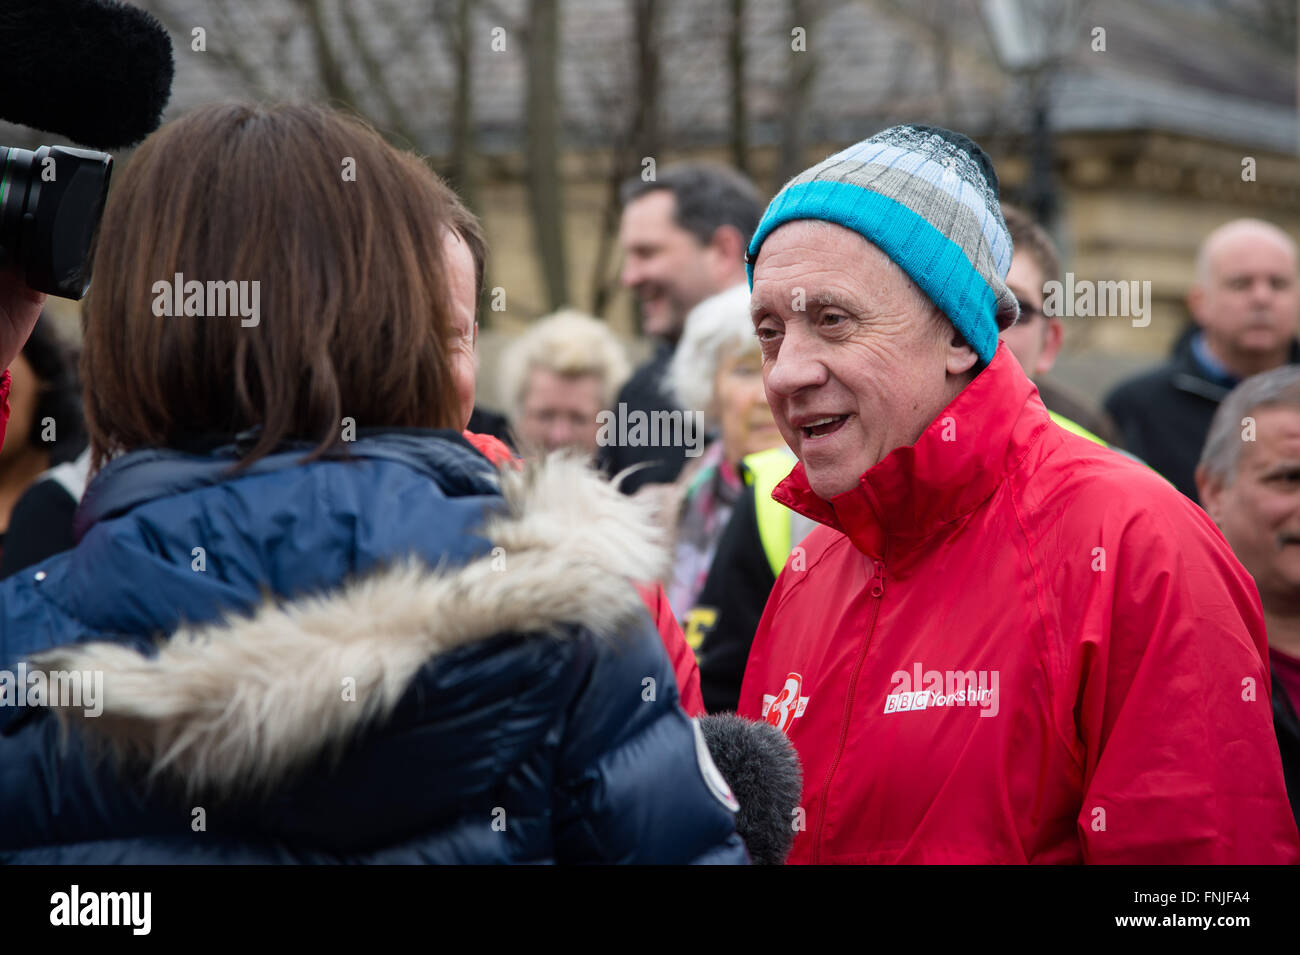 Saltaire, UK. 15th March, 2016. Look North television presenter Harry Gration interviewed in Saltaire on day six of a charity three legged walk around Yorkshire for Sport Relief. Credit:  Ian Lamond/Alamy Live News Stock Photo